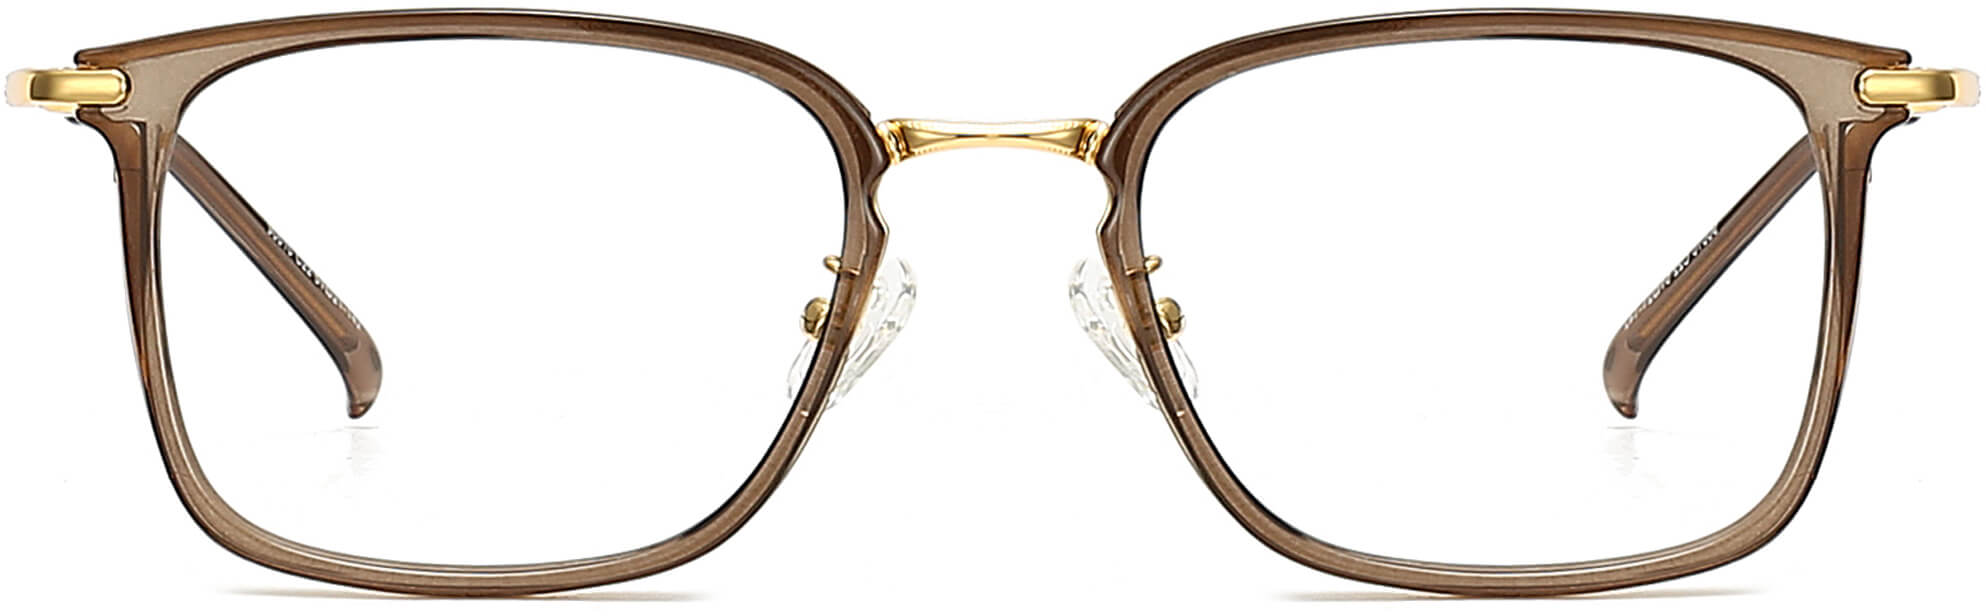 Nehemiah Square Brown Eyeglasses from ANRRI, front view